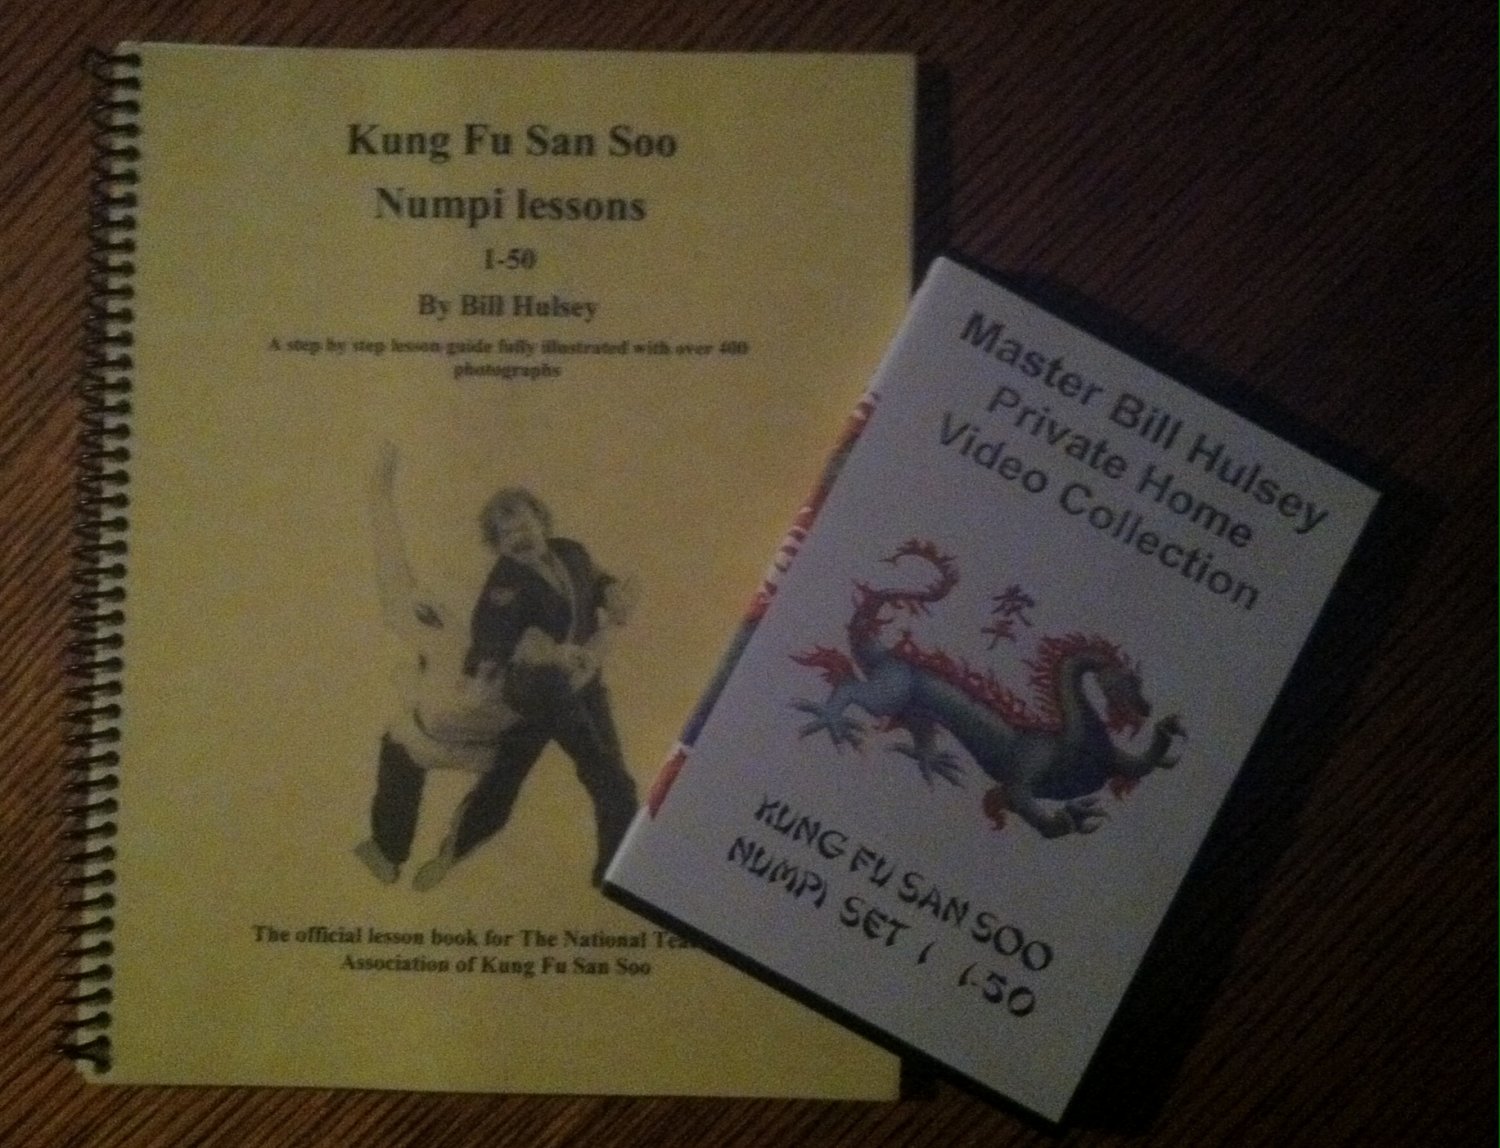 Numpi Lessons 1-50 Bundle DVD and Lesson Book